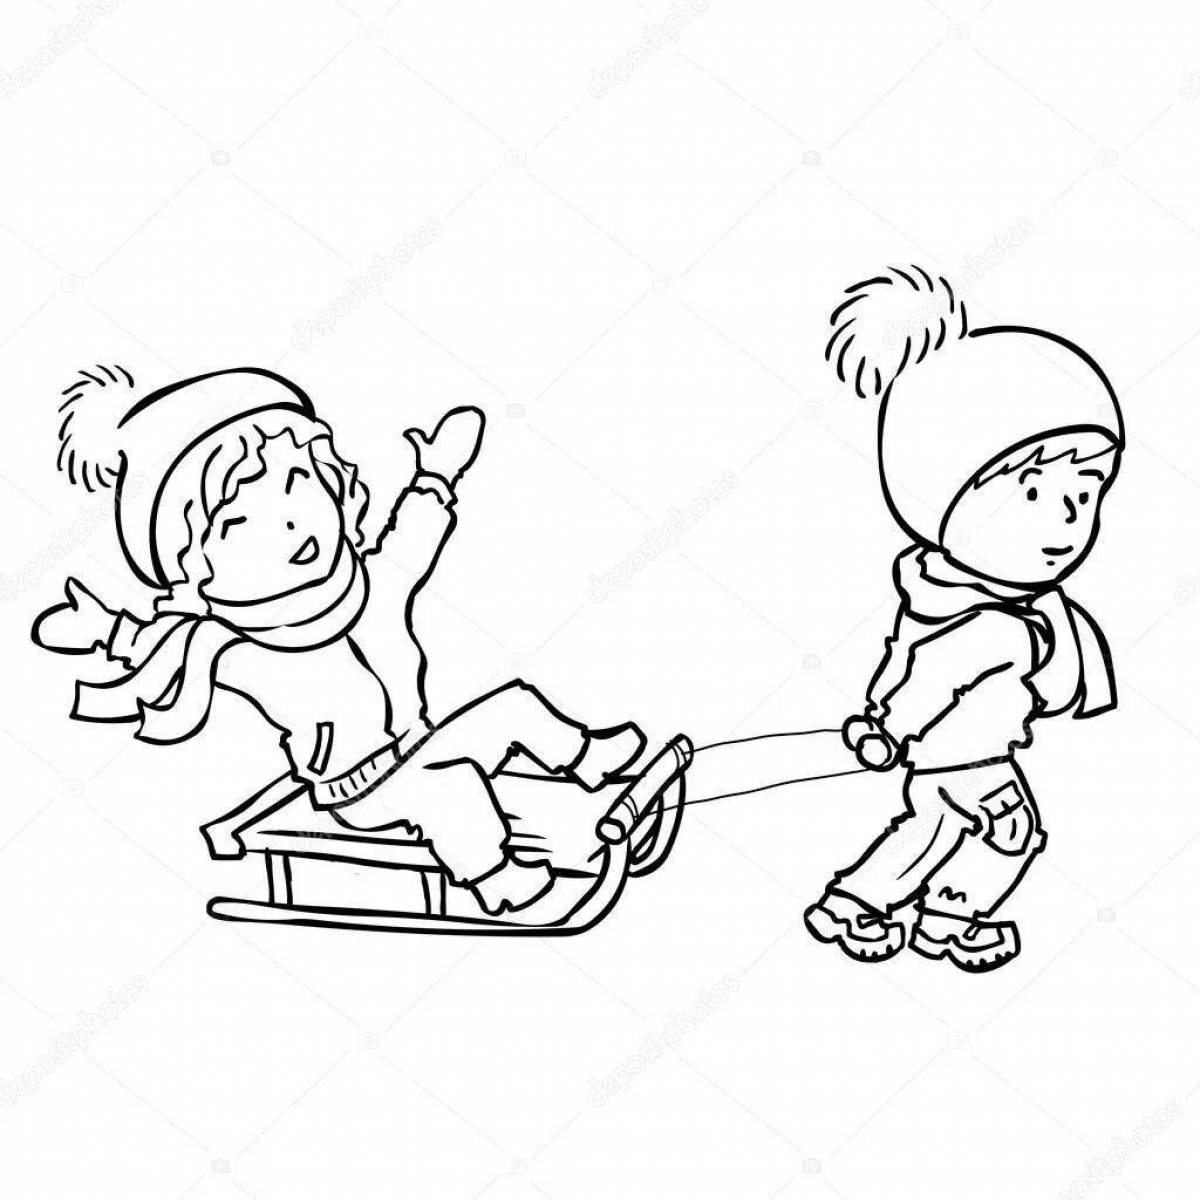 Bright children's coloring on a sled